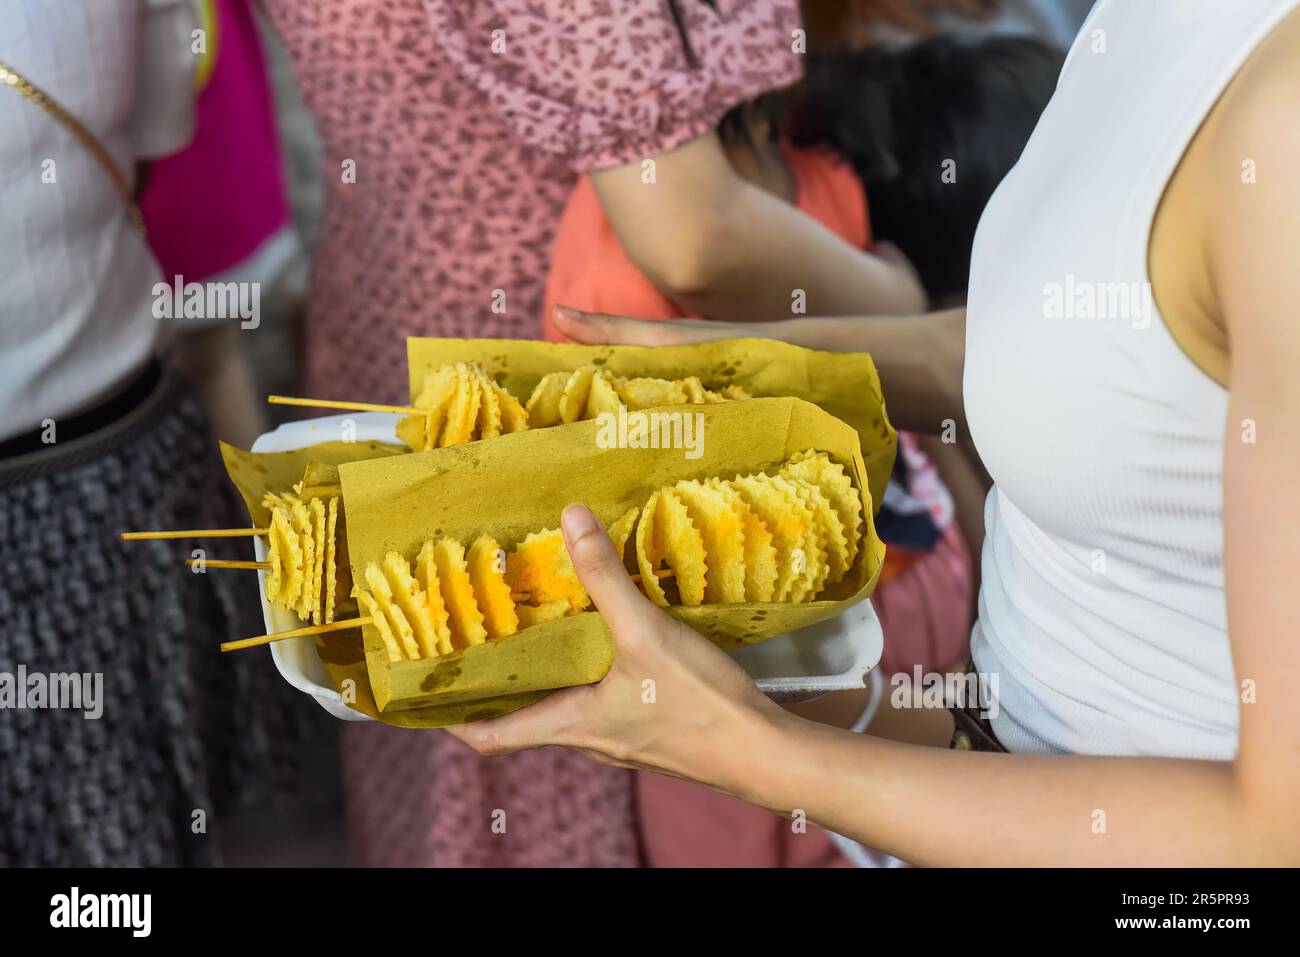 https://c8.alamy.com/comp/2R5PR93/hands-holding-paper-box-with-fried-potato-chips-on-skewers-in-vietnamese-night-market-2R5PR93.jpg